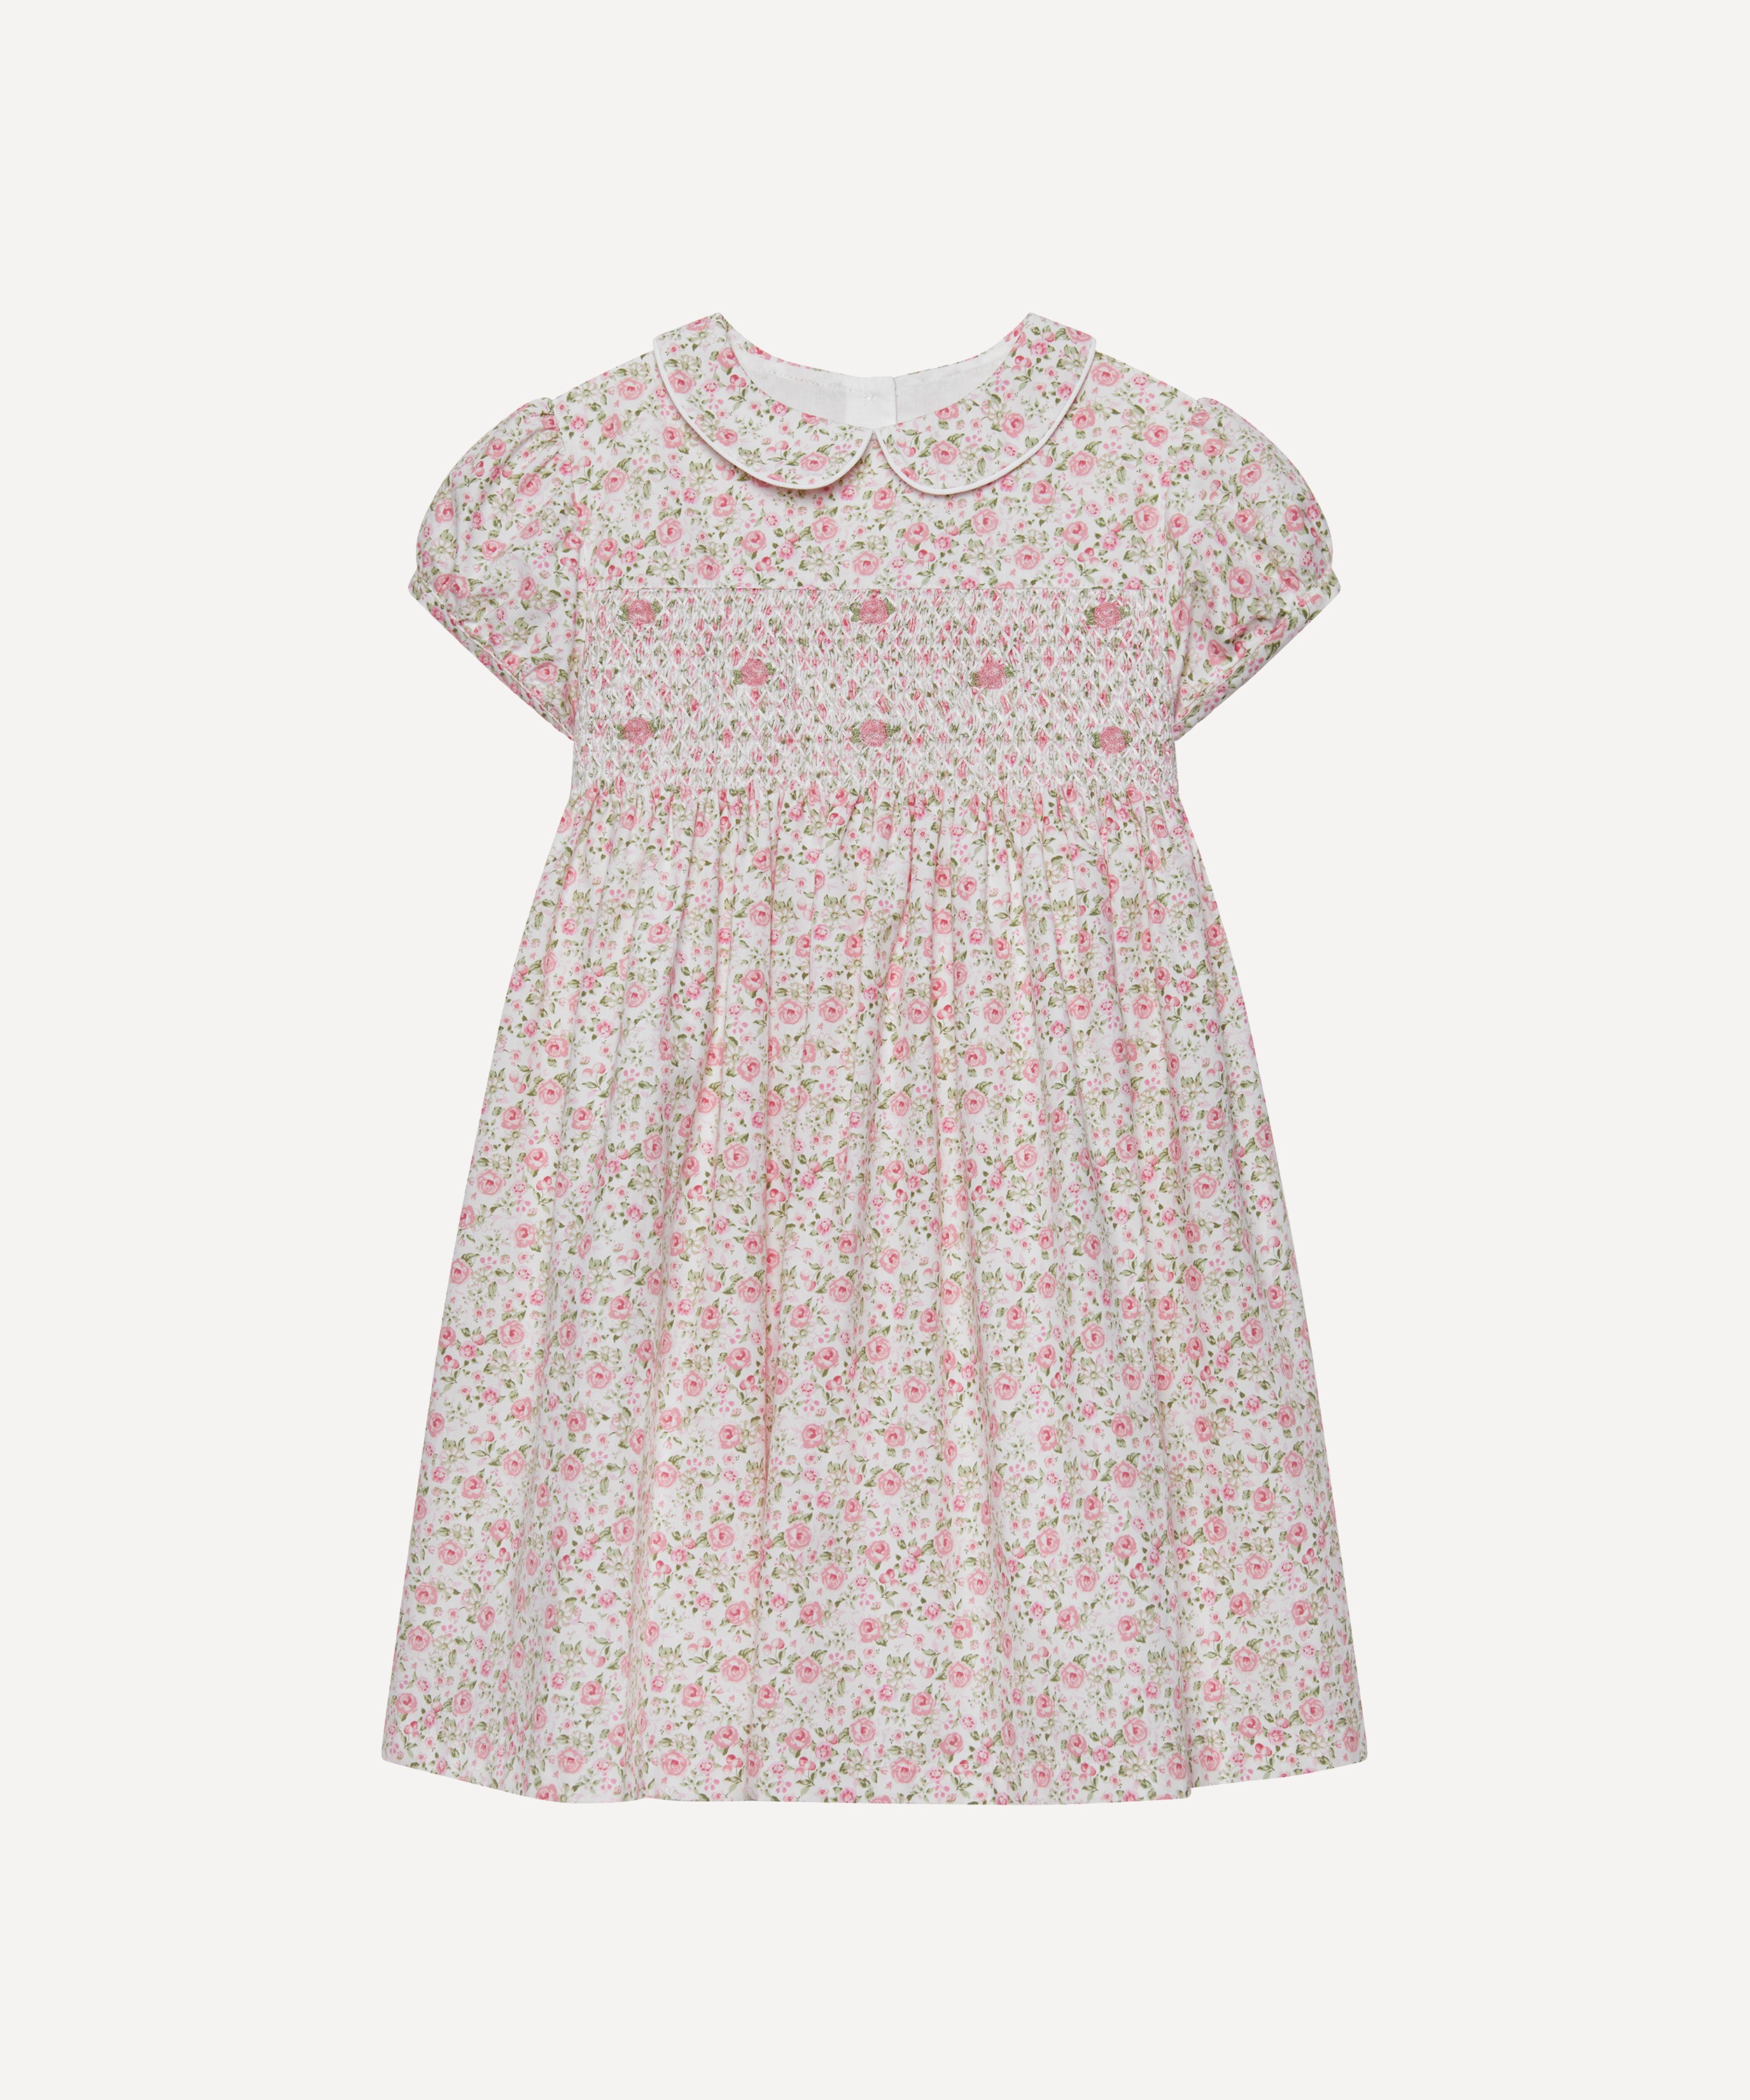 Trotters - Catherine Rose Smocked Dress 2-7 Years